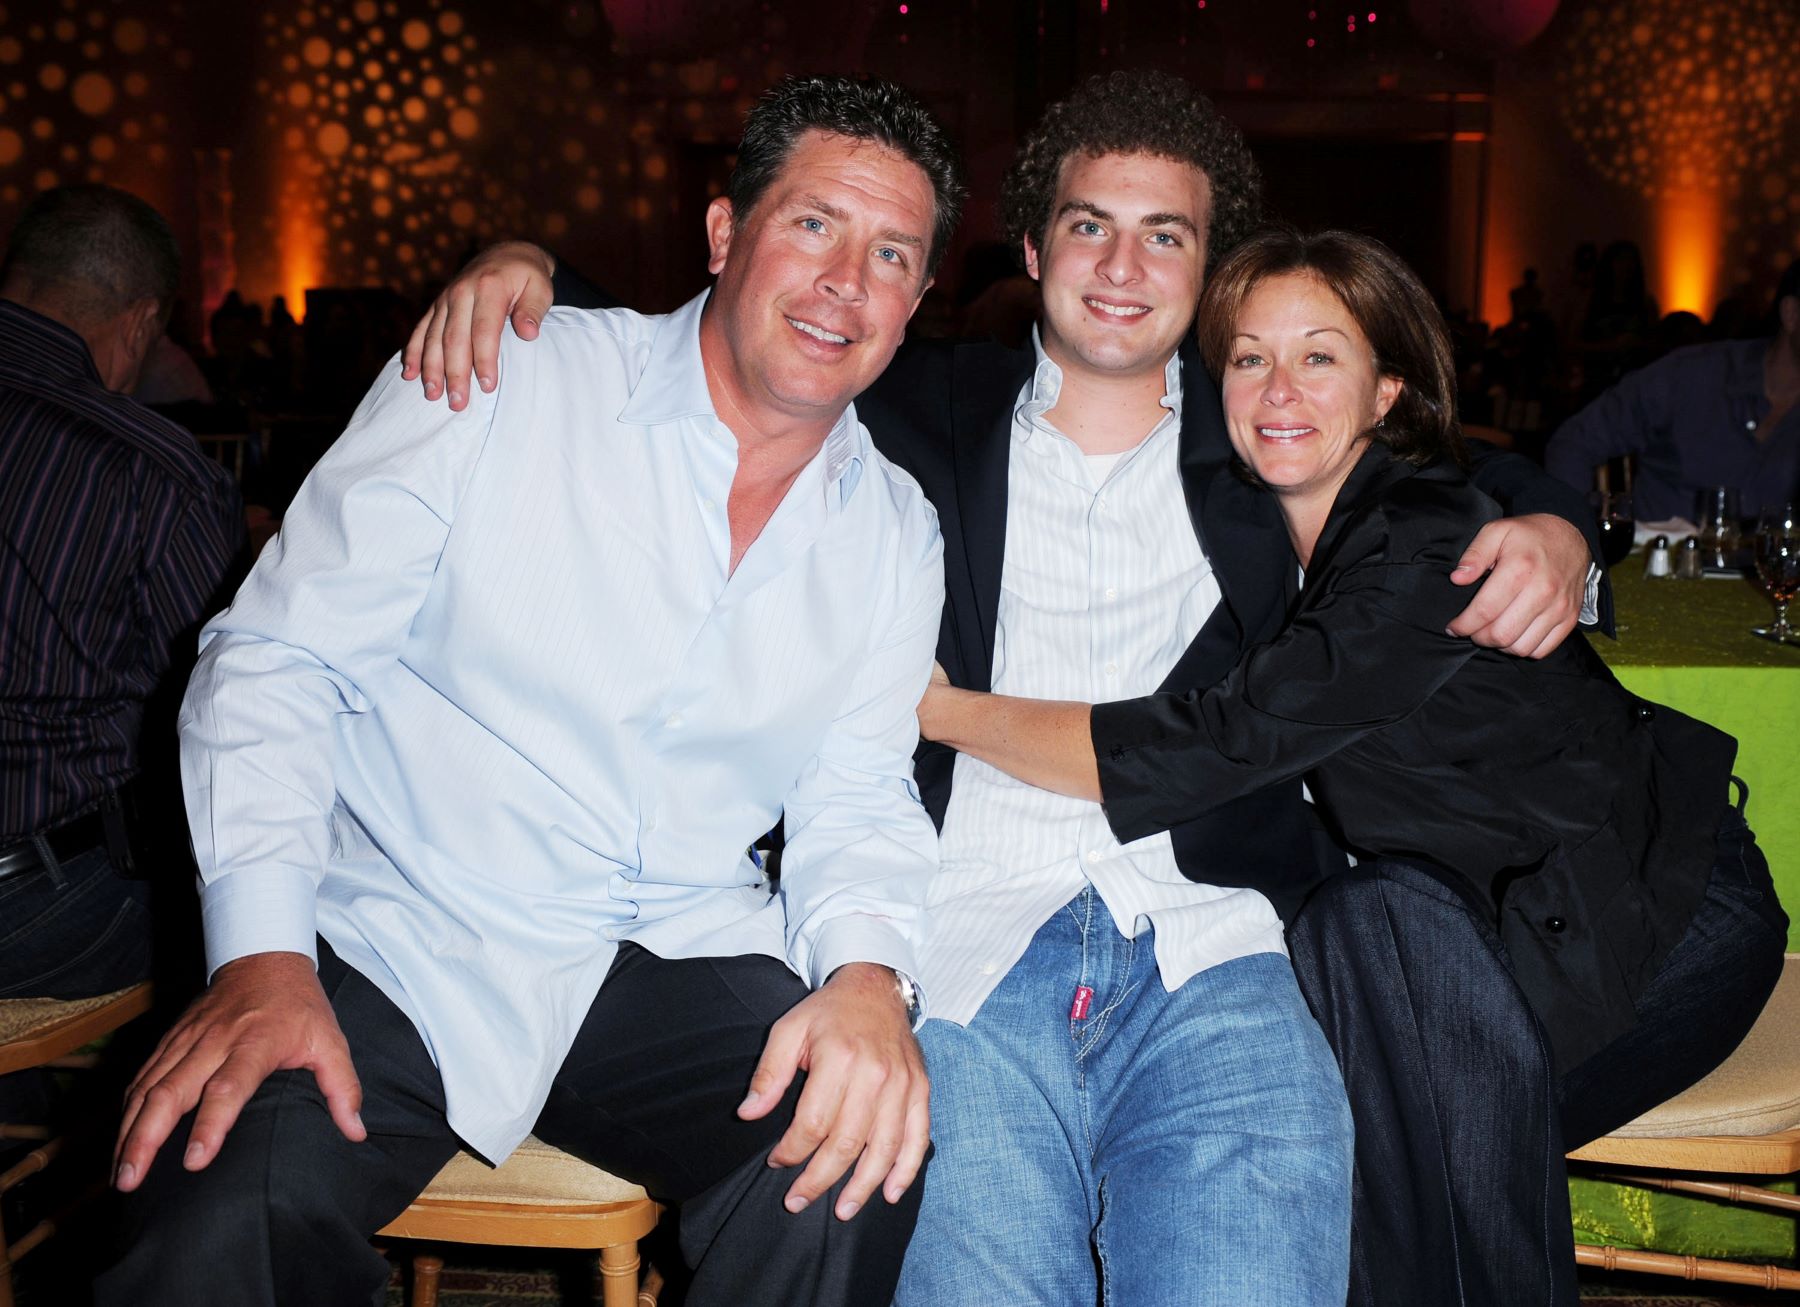 NFL Great Dan Marino’s Son Avoided Football but Excels in an Entirely Different Sport